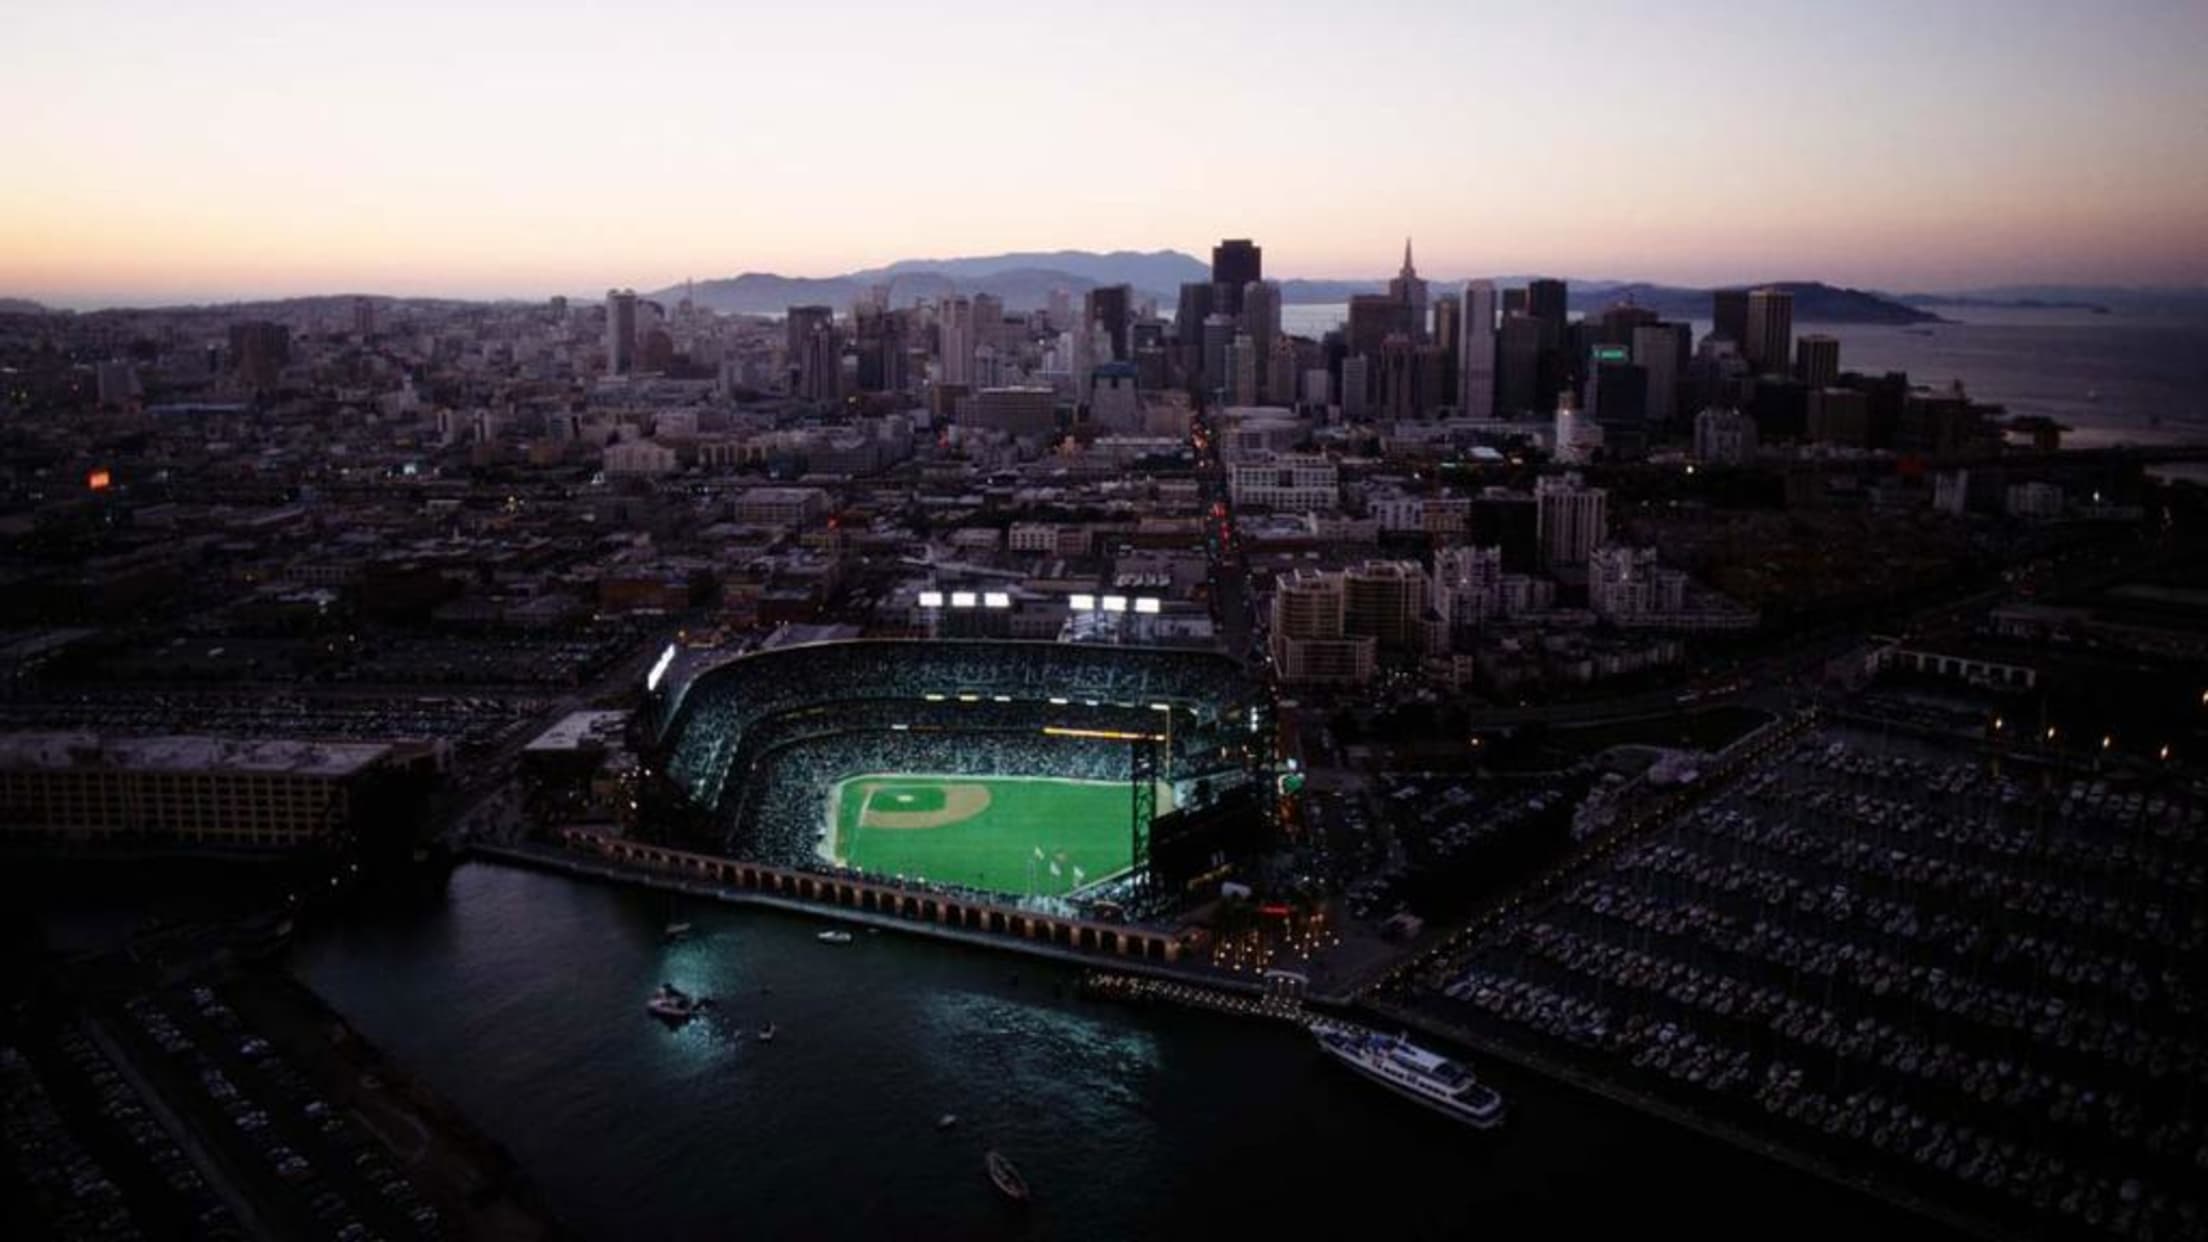 Visitor's Guide to Oracle Park - Home of the San Francisco Giants